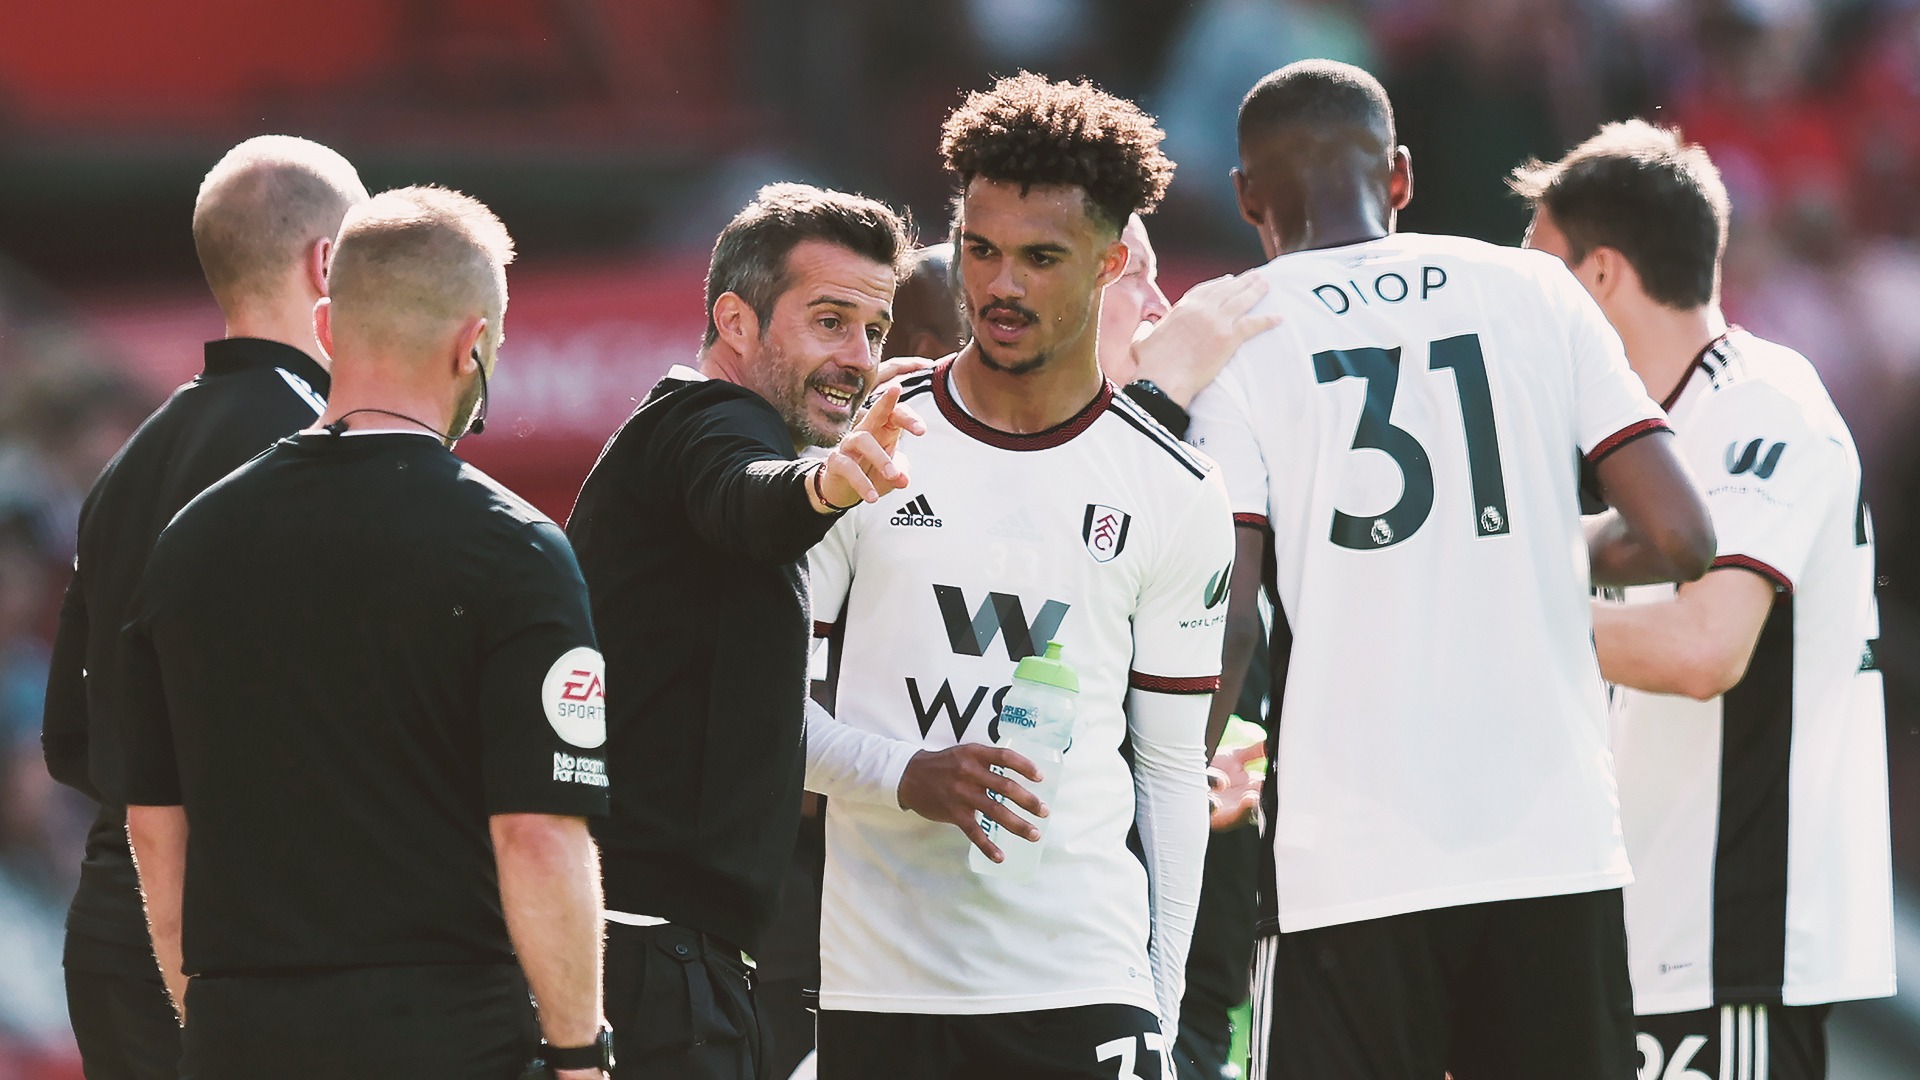 Fulham teams up with W88 for new season as Brentford fans vote against  betting sponsors 